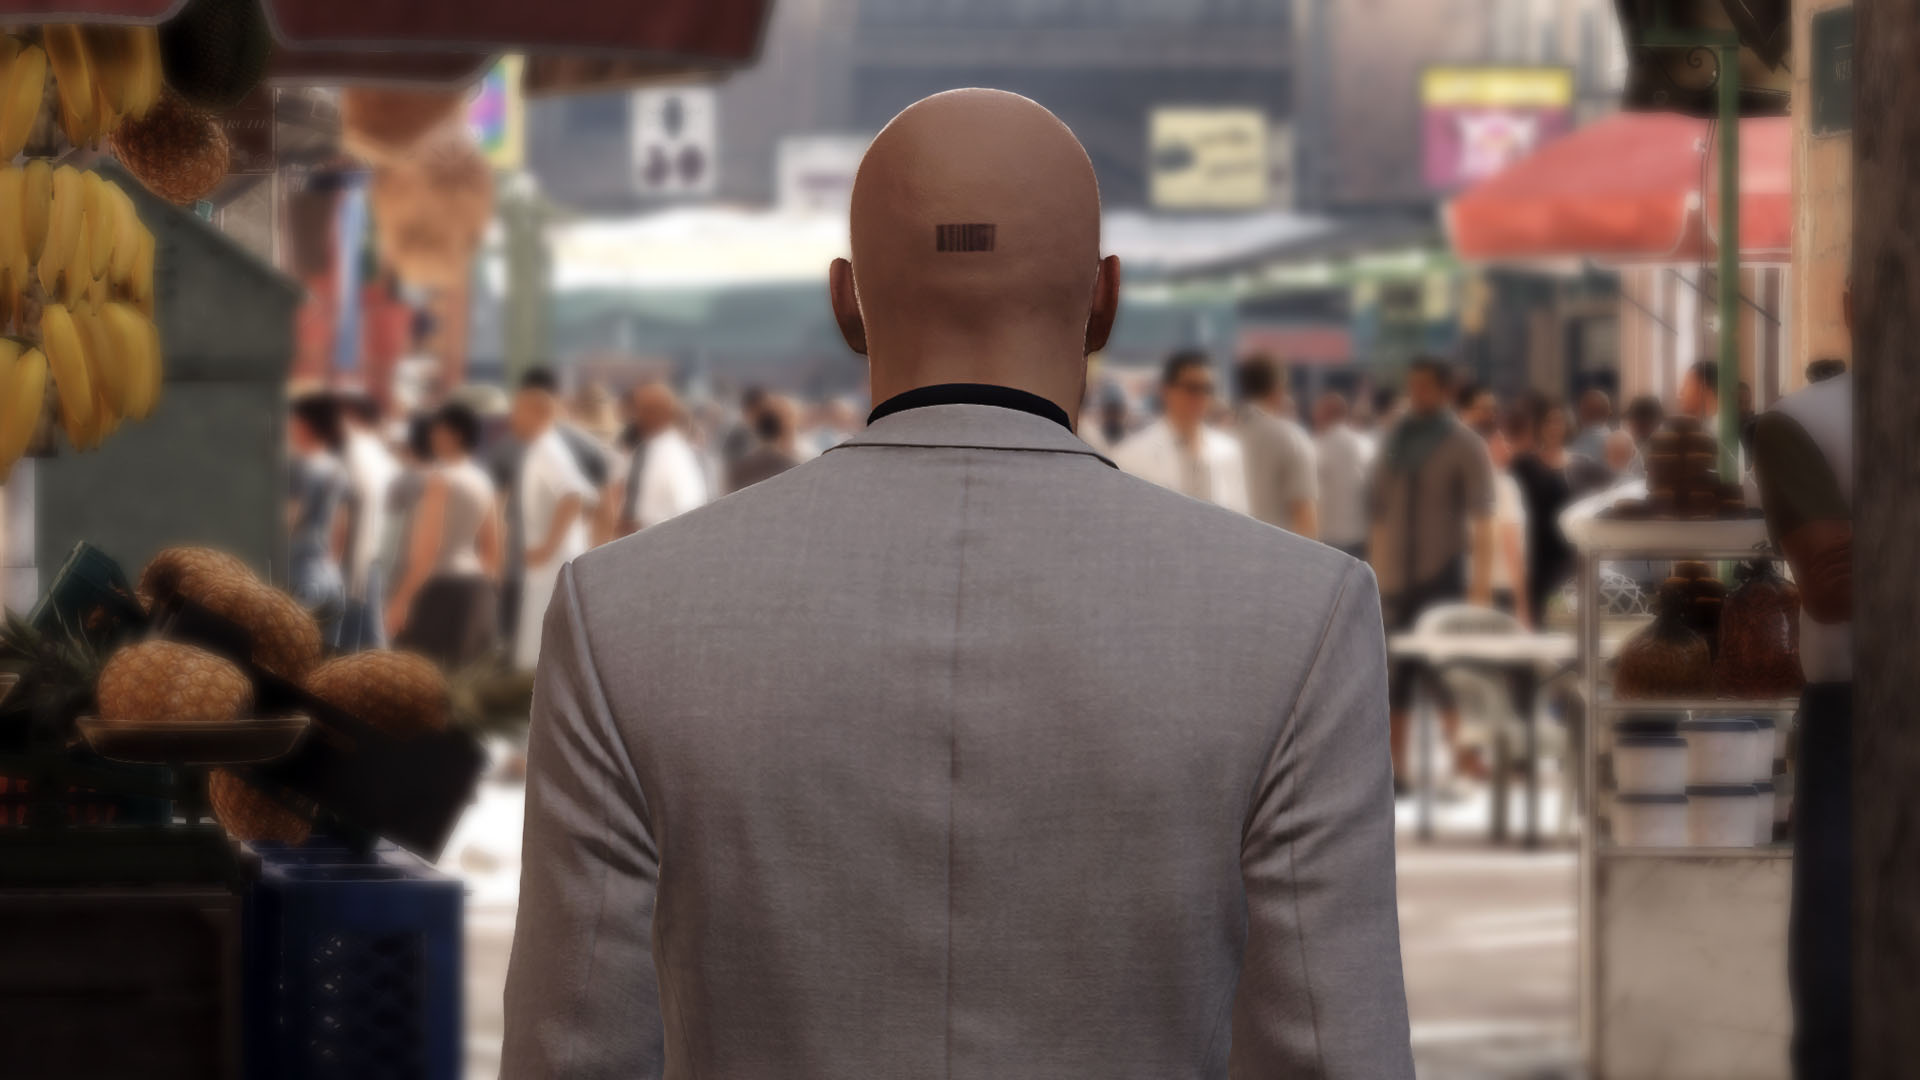 Square Enix Hitman for PlayStation 4 - image 4 of 9